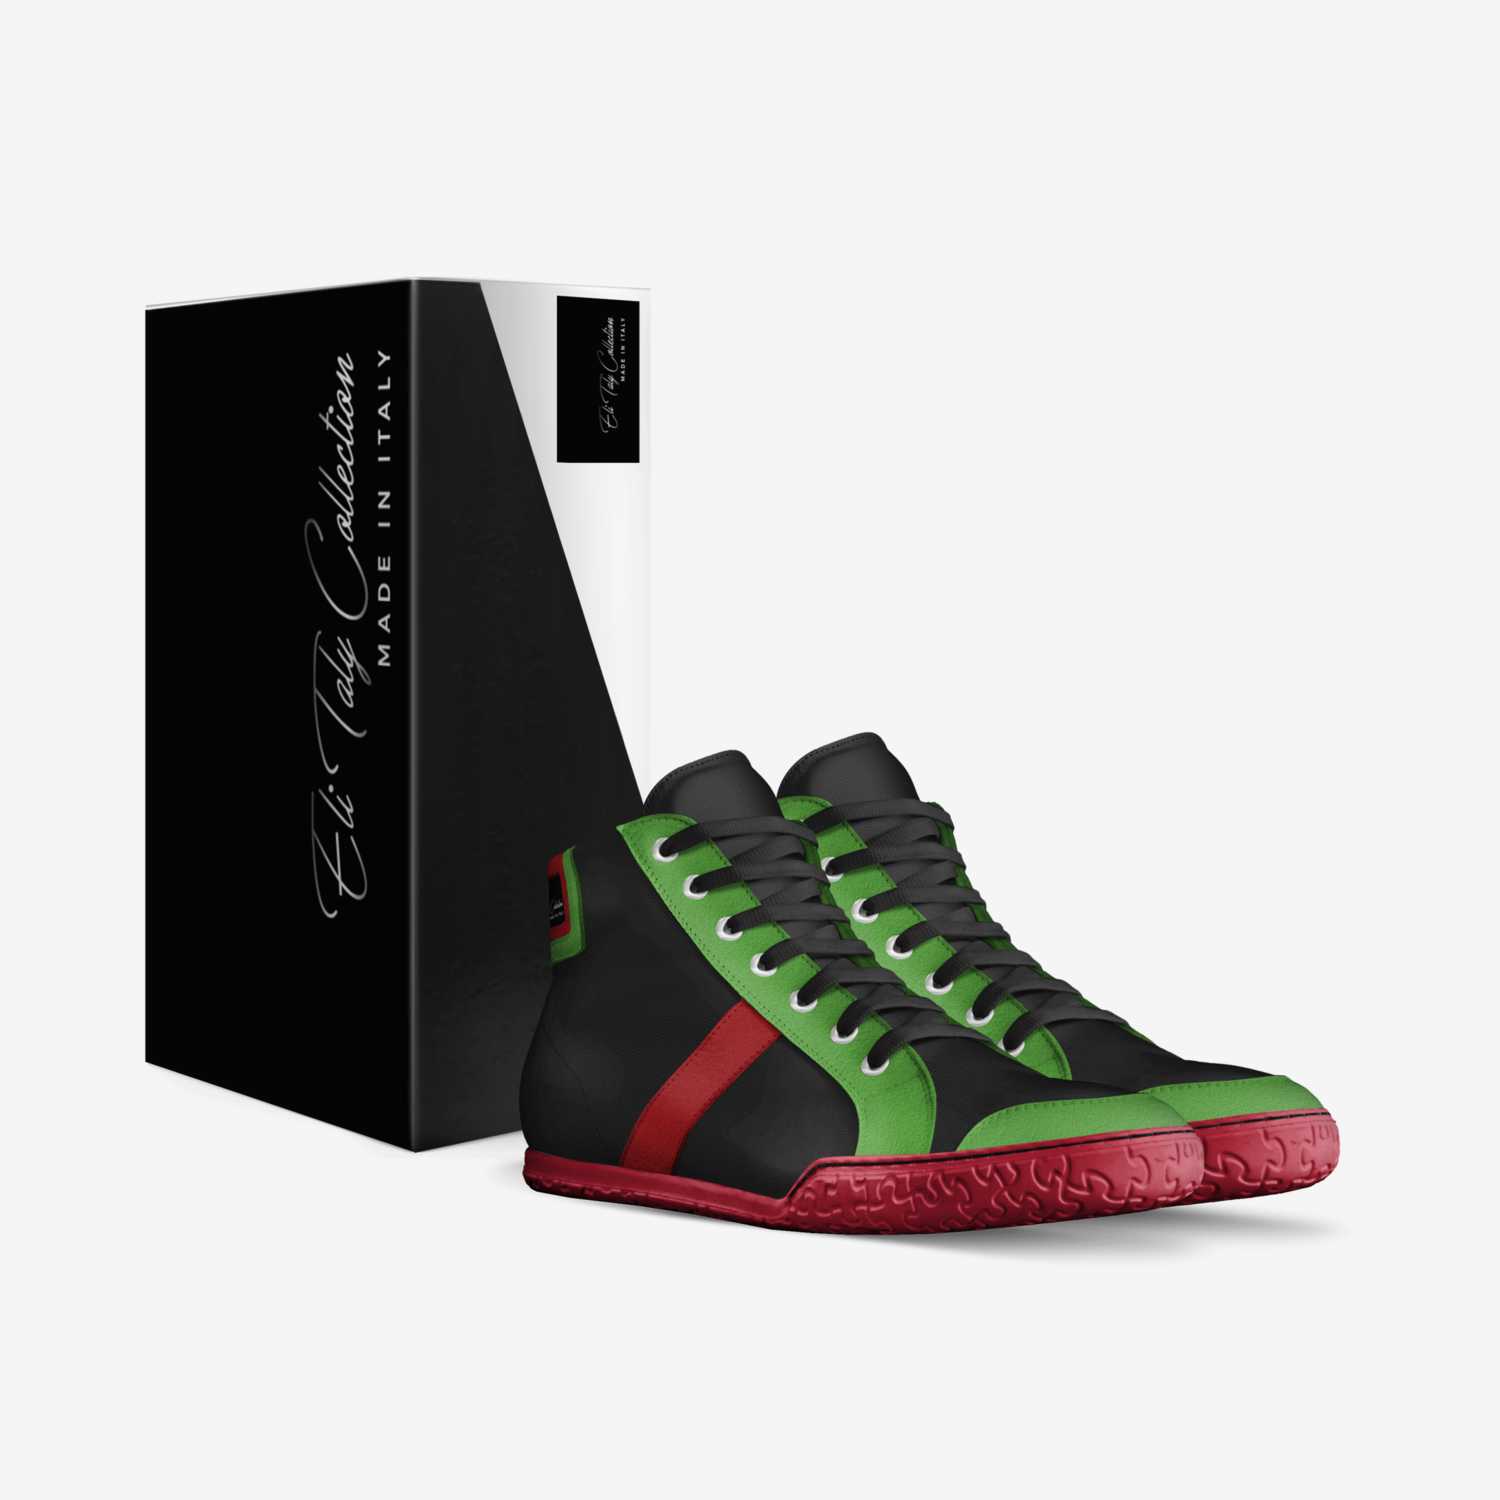 Eli Taly- Ambition custom made in Italy shoes by Eli Taly Collection | Box view